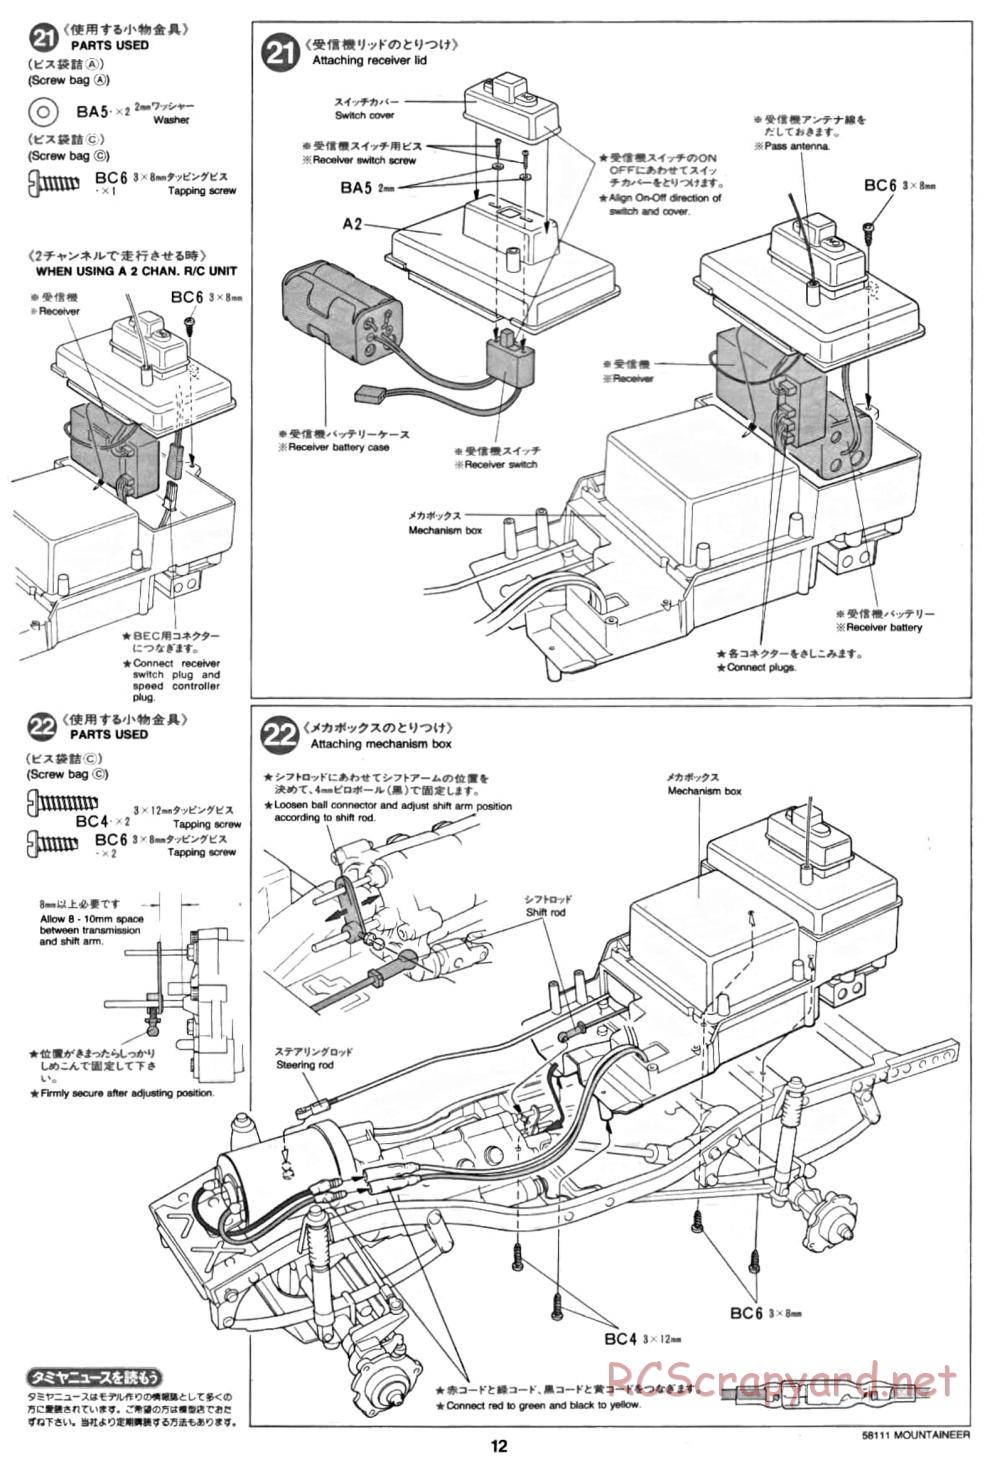 Tamiya - Toyota 4x4 Pick Up Mountaineer Chassis - Manual - Page 12